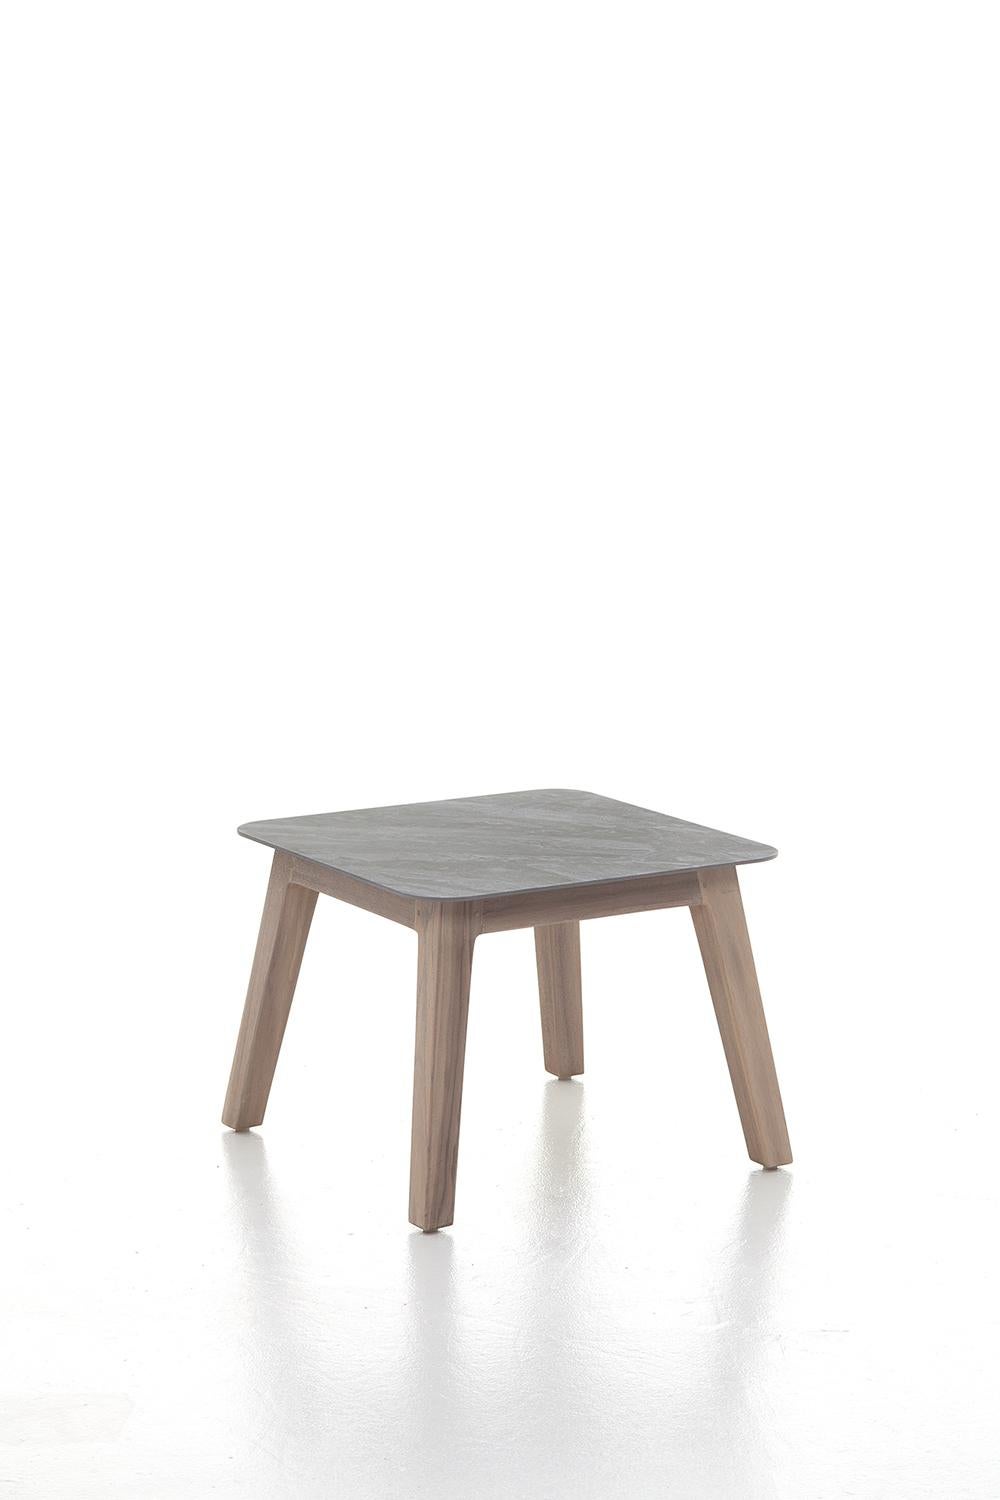 Contemporary Gervasoni Inout 868 Coffee Table in Grey Porcelain Stoneware Top and Washed Teak For Sale